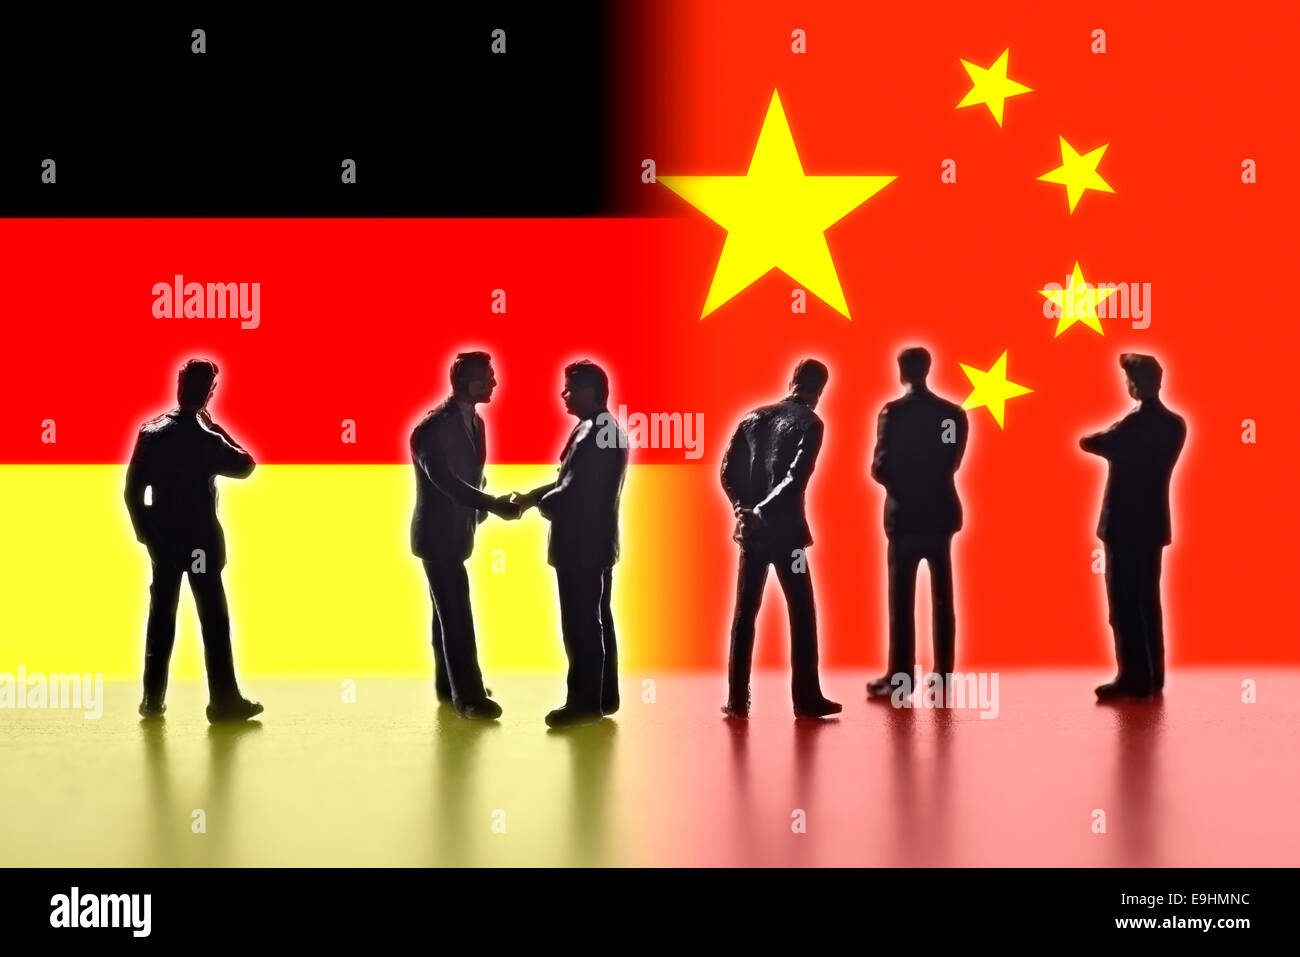 Model figures symbolizing the politicians are faced with the flags of Germany and China. Two of them shake hands. Digital Composite (DC) Stock Photo